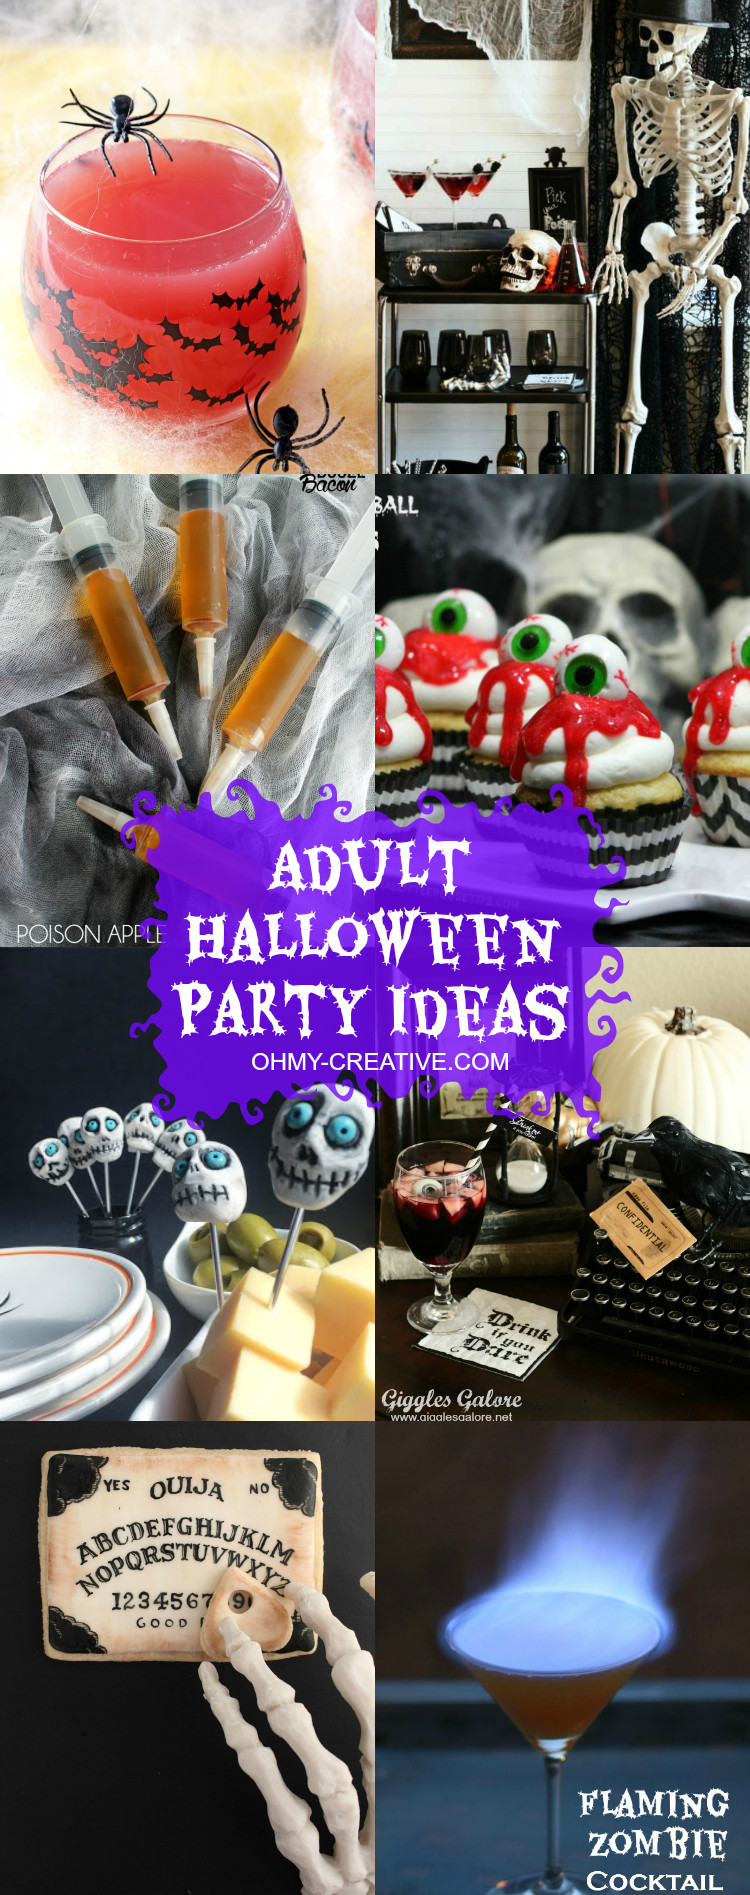 Ideas For Halloween Party For Adults
 Adult Halloween Party Ideas Oh My Creative